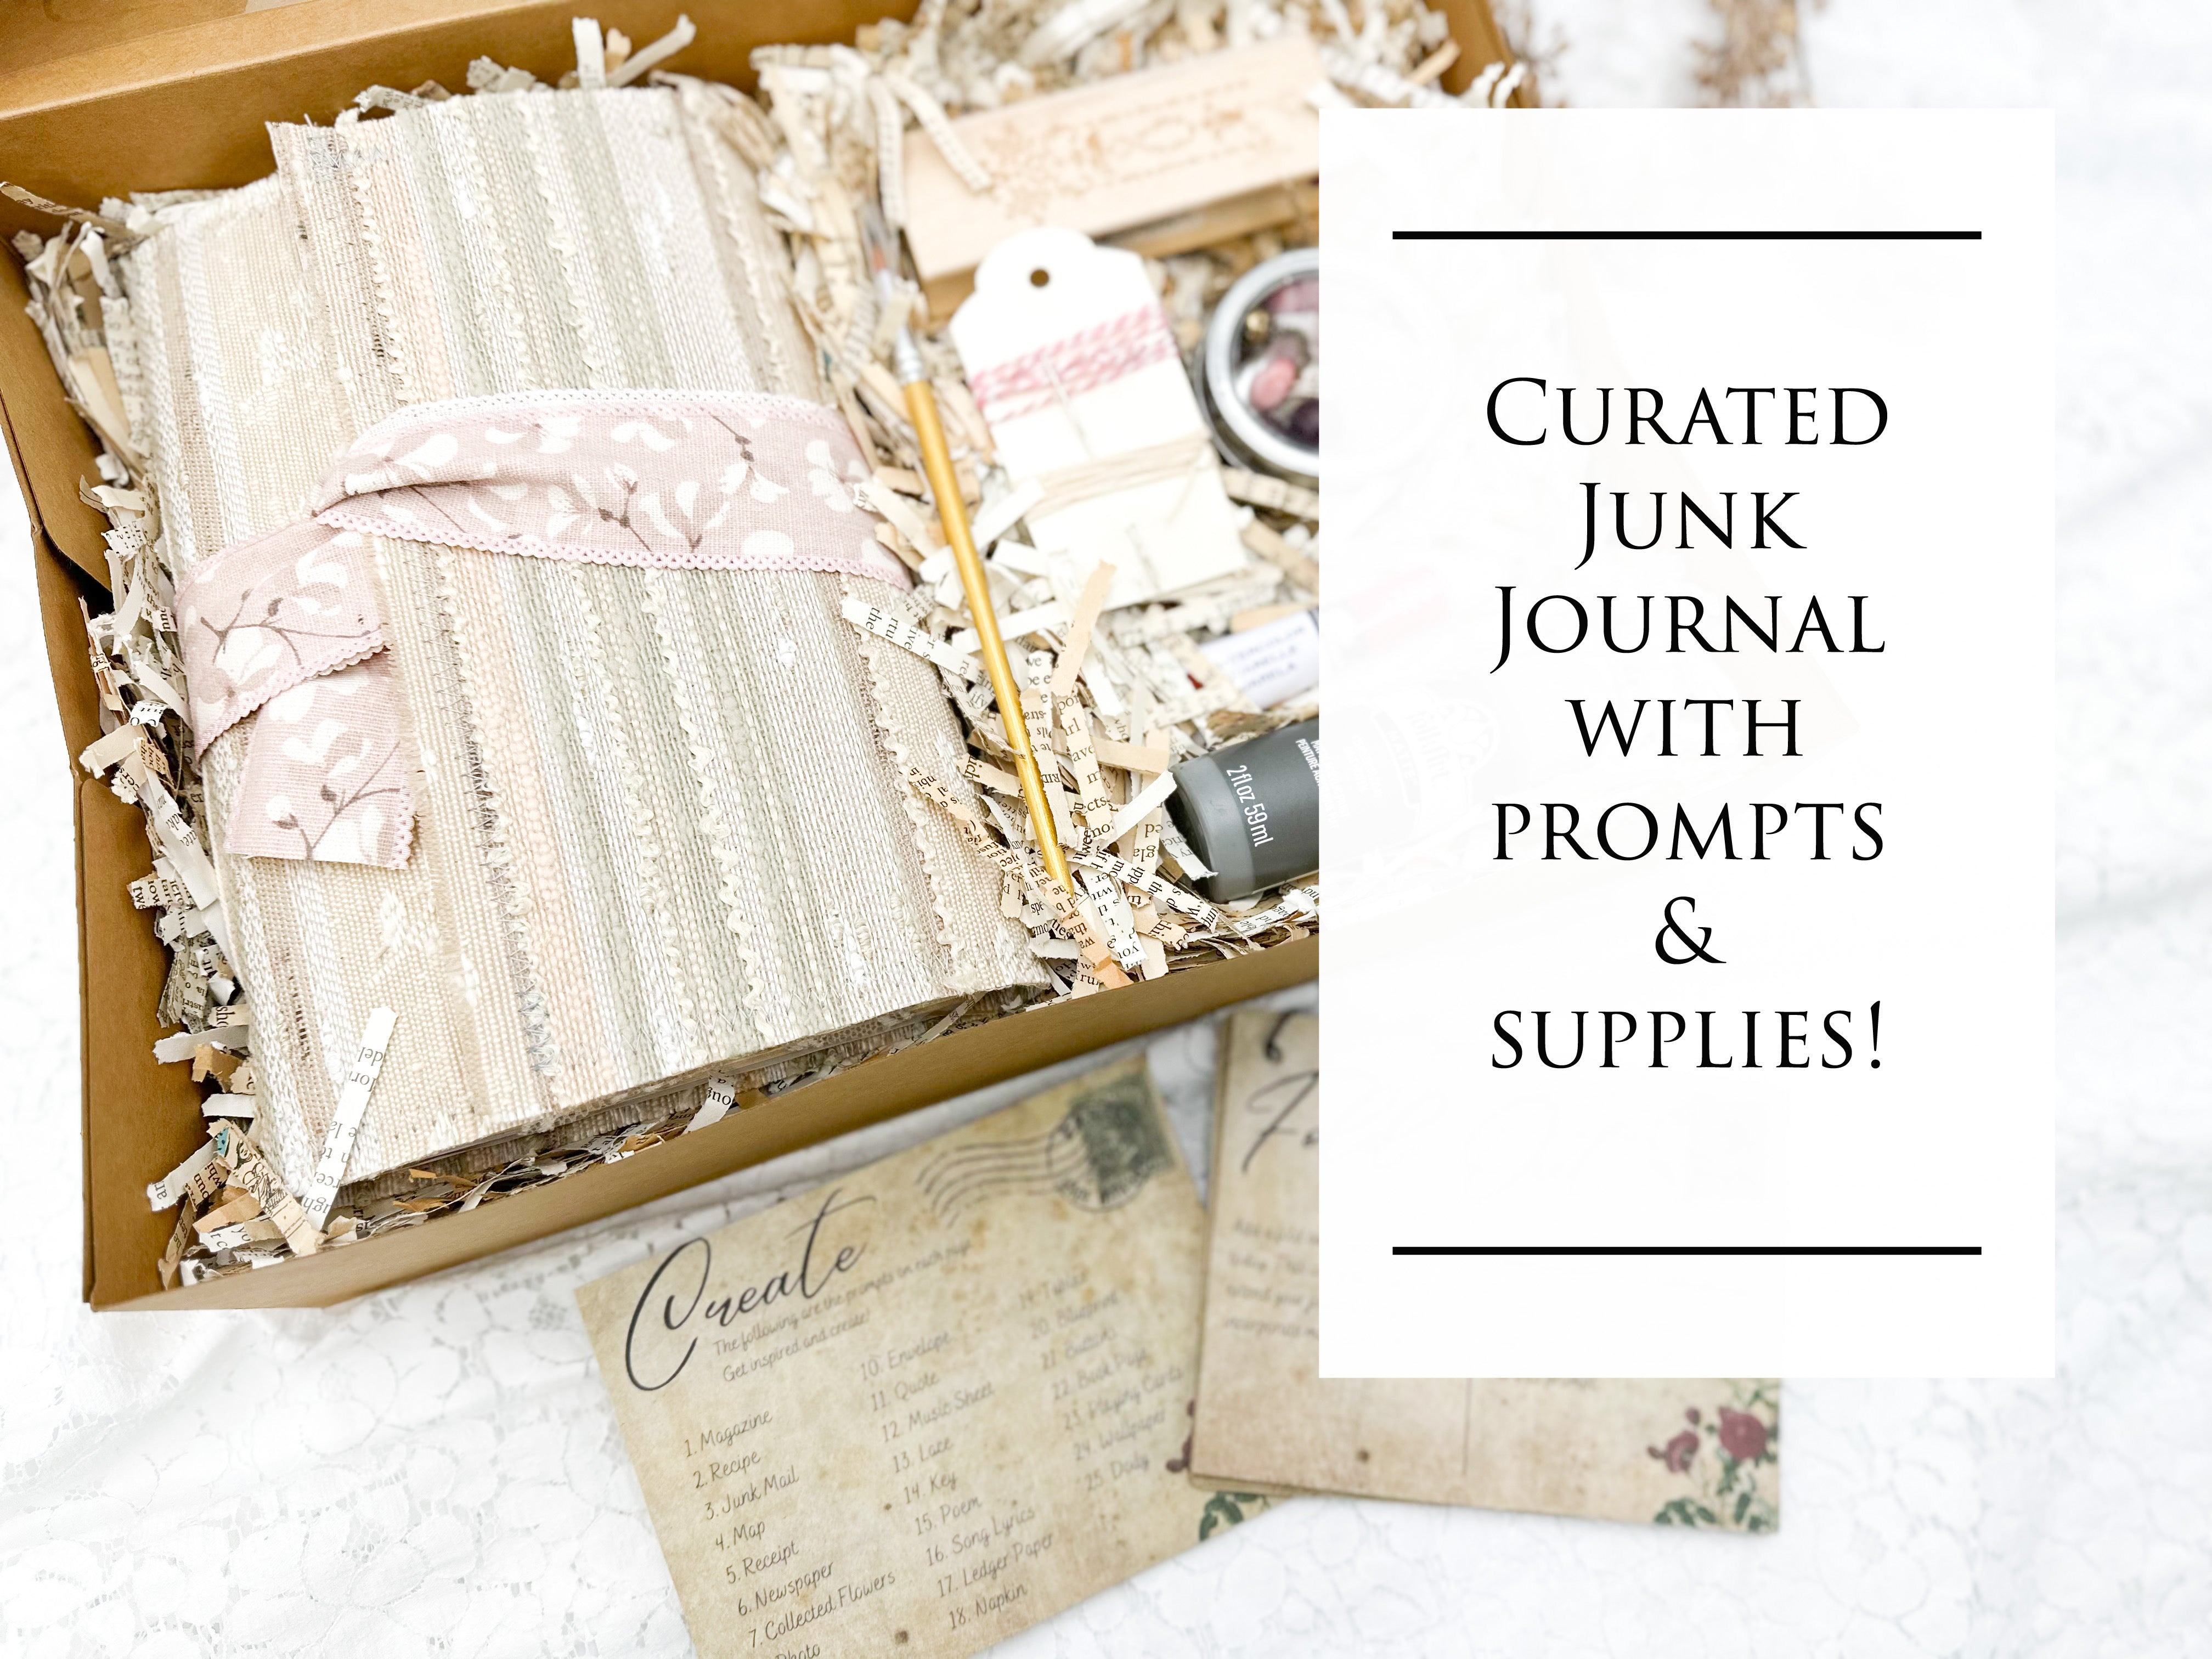 Stamped Linen for Journaling and Crafting, Junk Journal Supplies